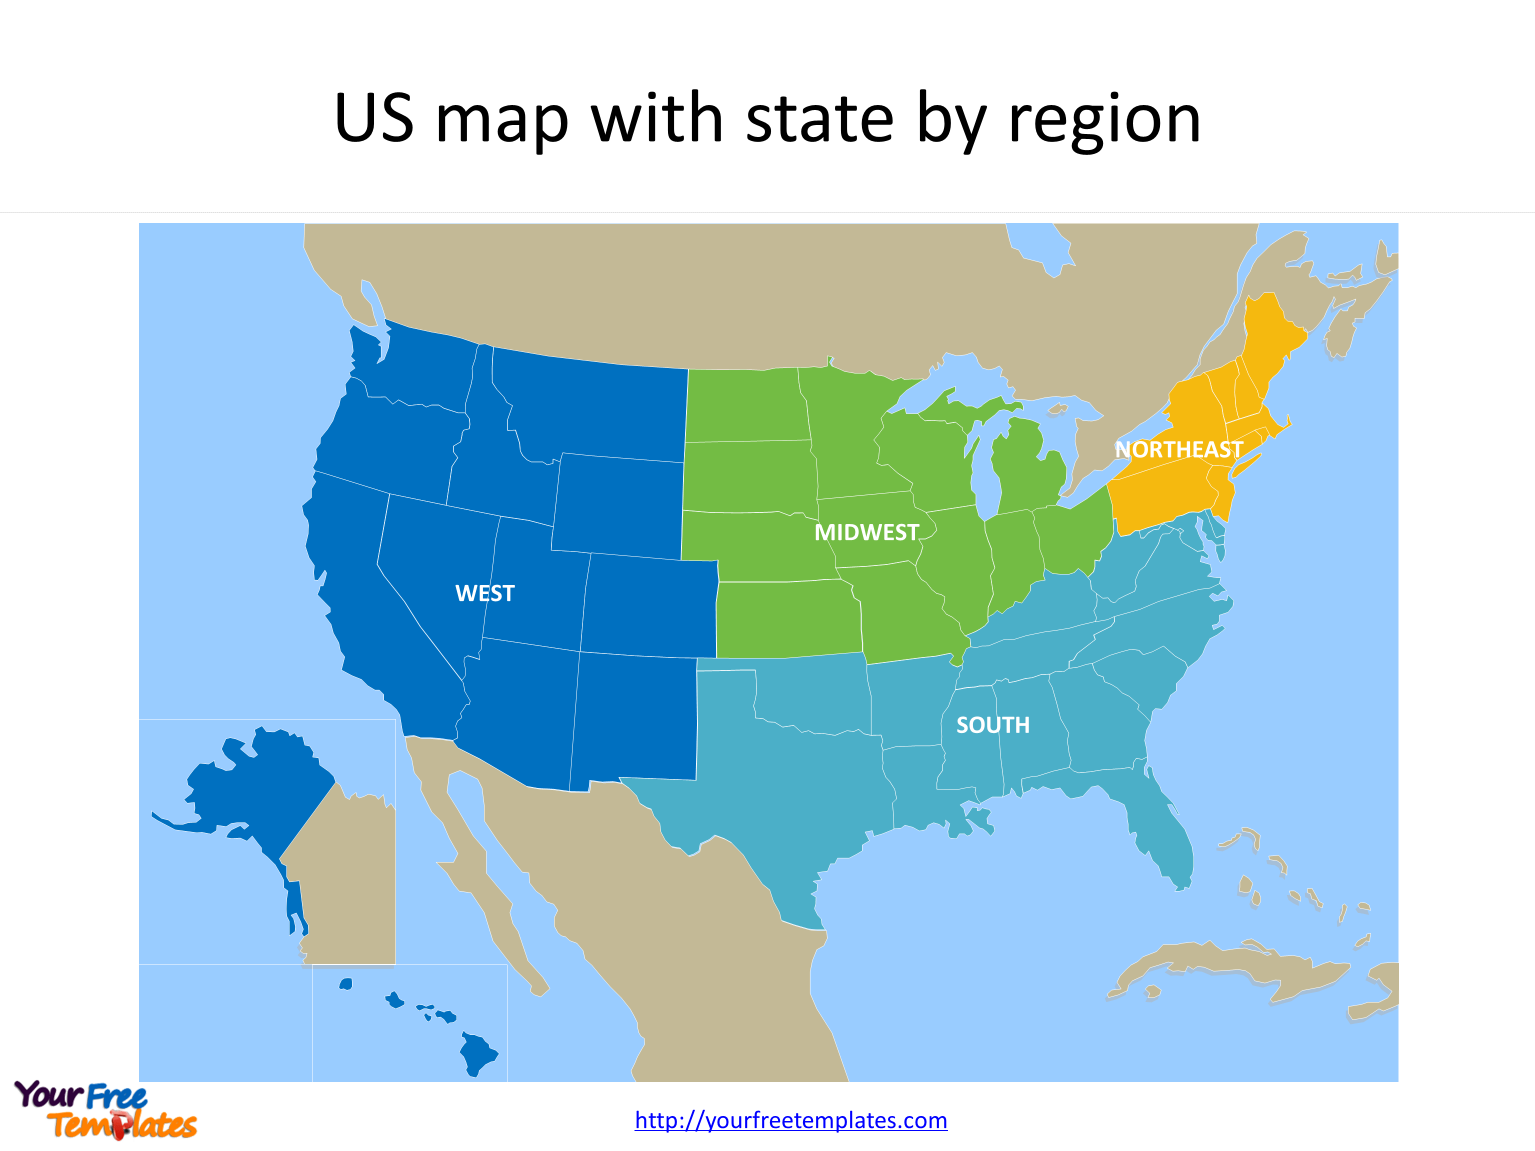 US state map by four census region